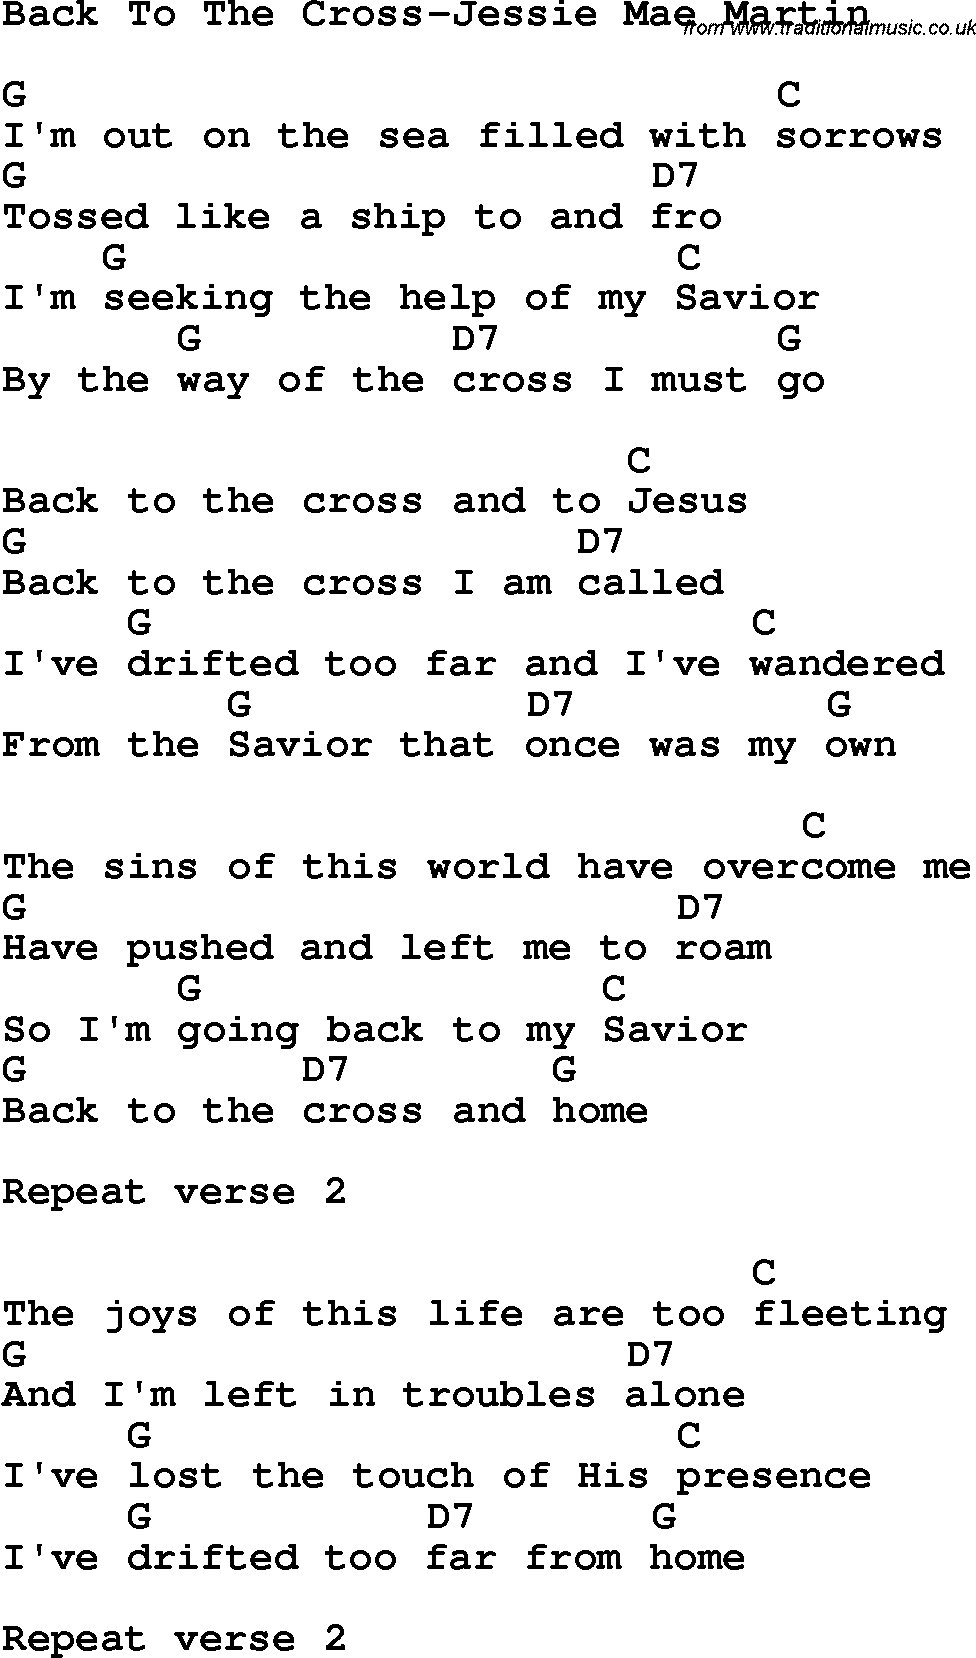 Country, Southern and Bluegrass Gospel Song Back To The Cross-Jessie Mae Martin lyrics and chords